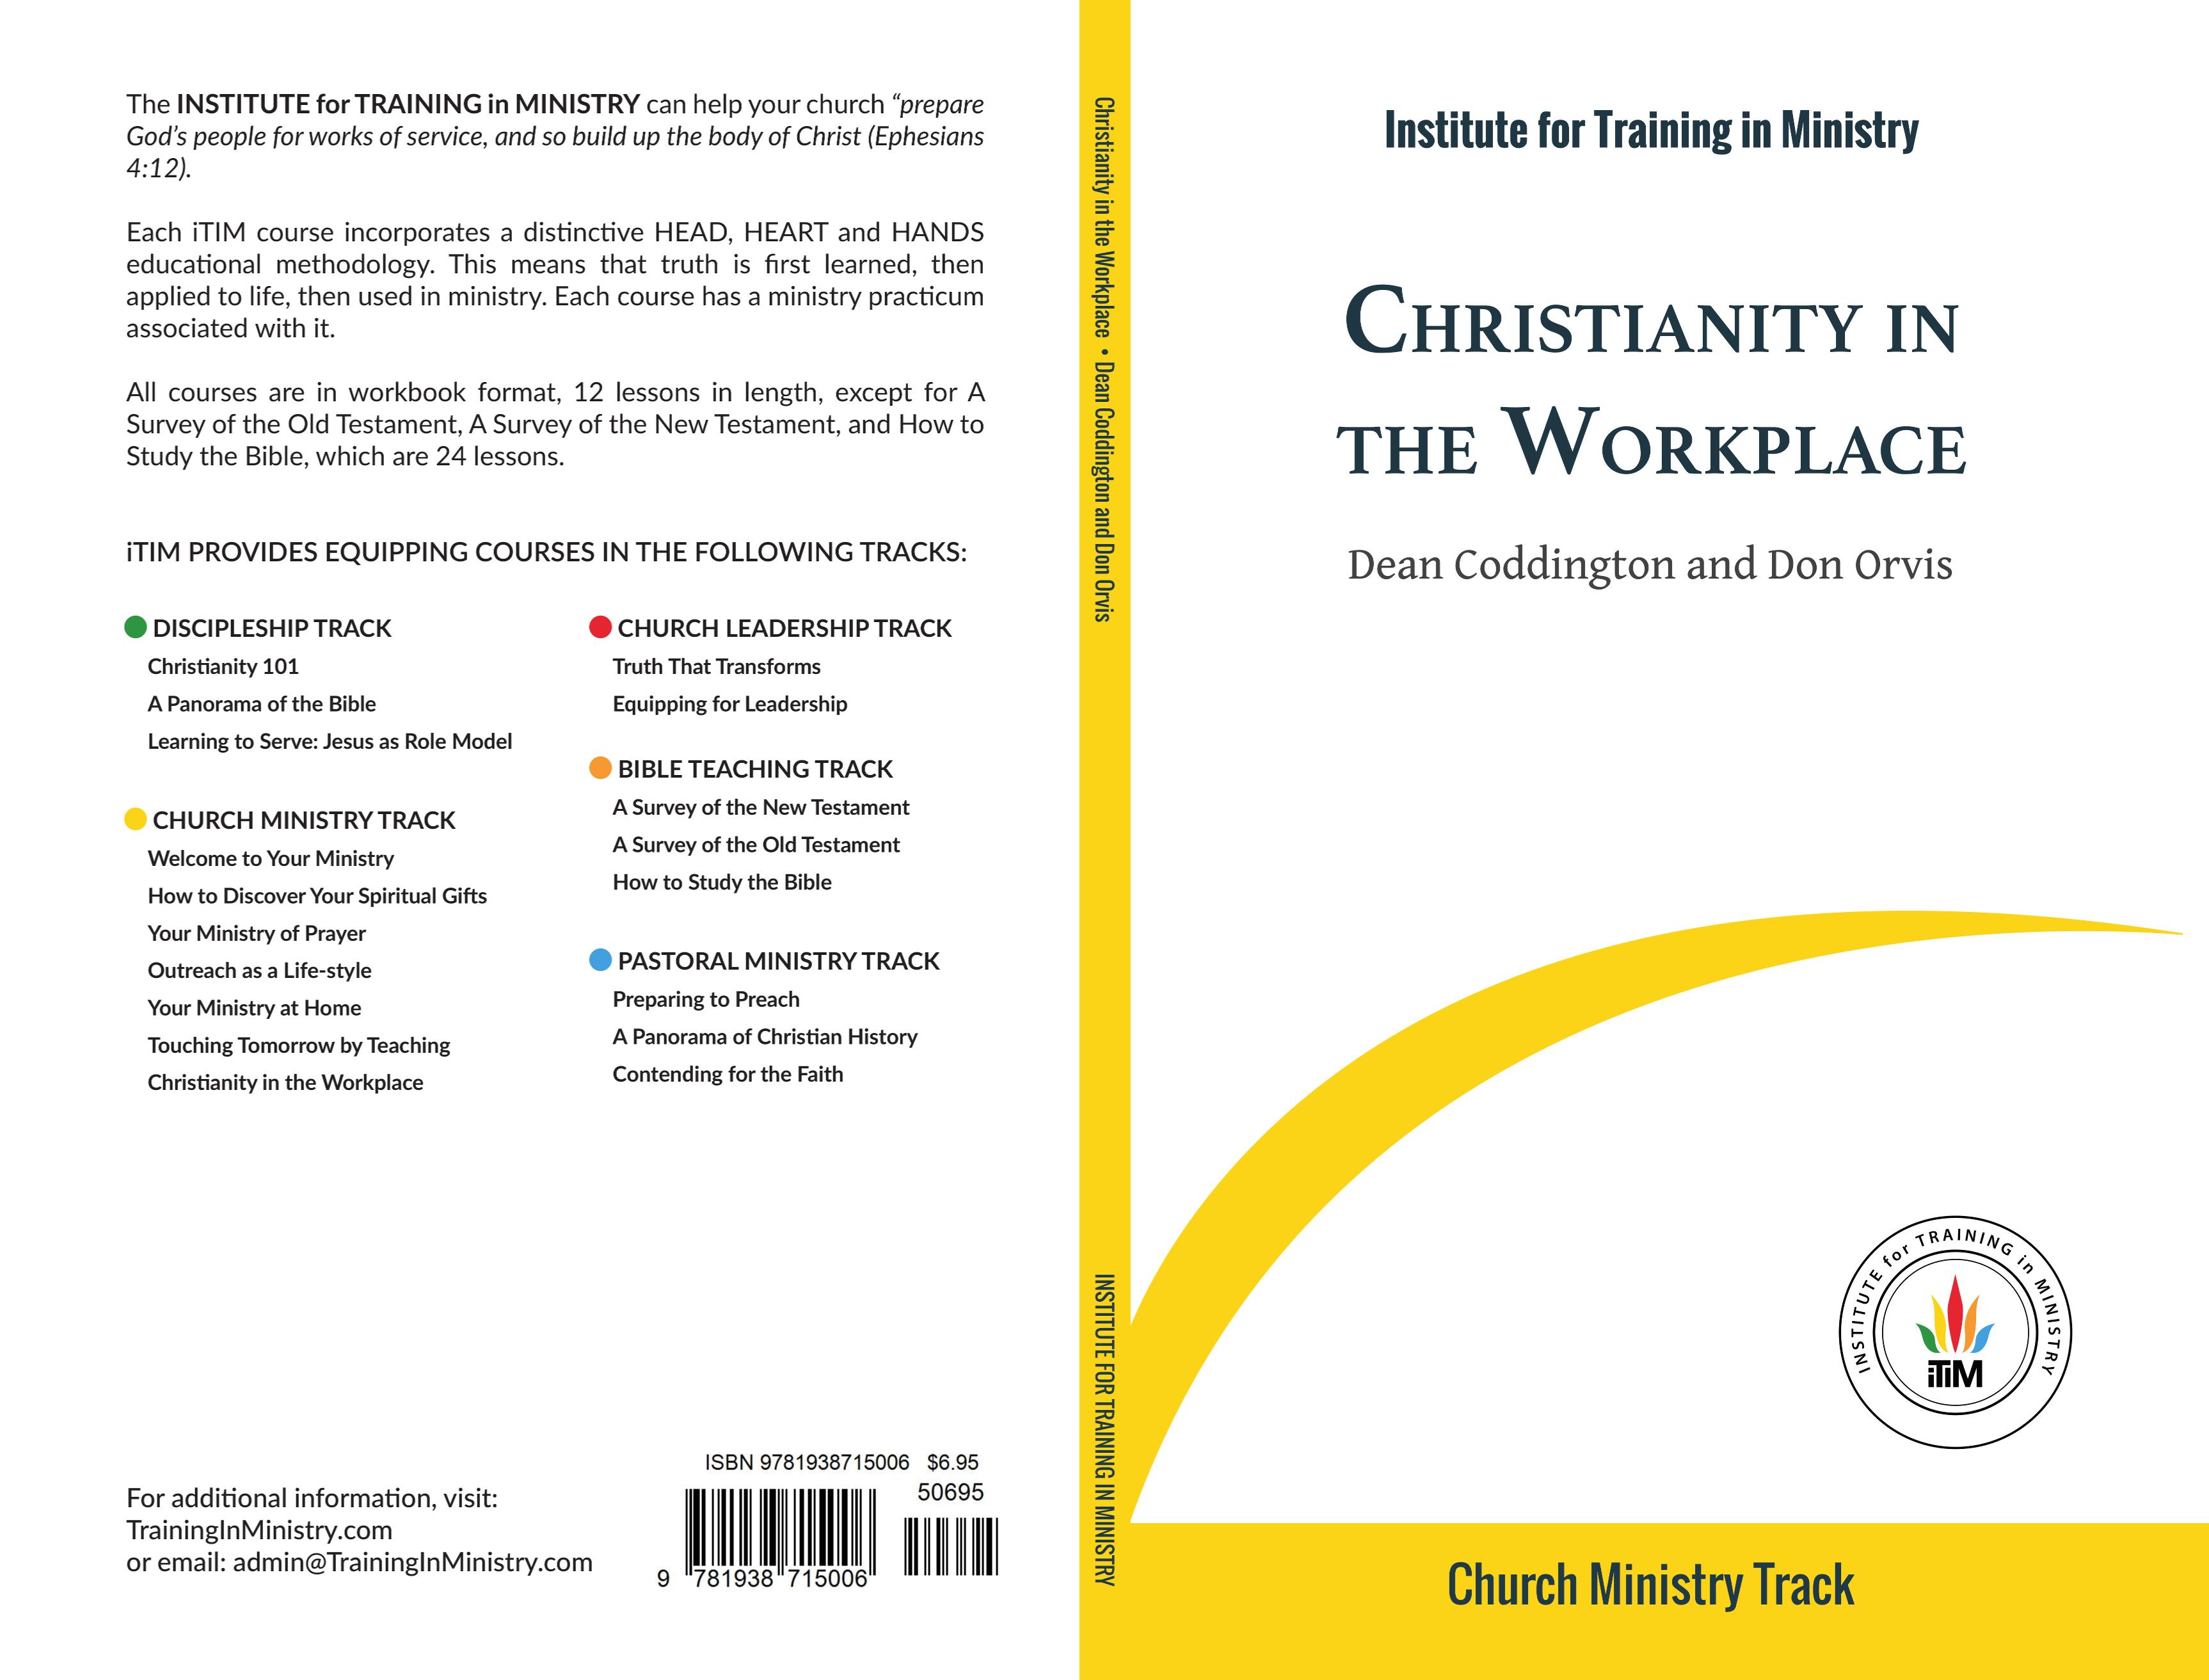 Christianity in the Workplace cover image